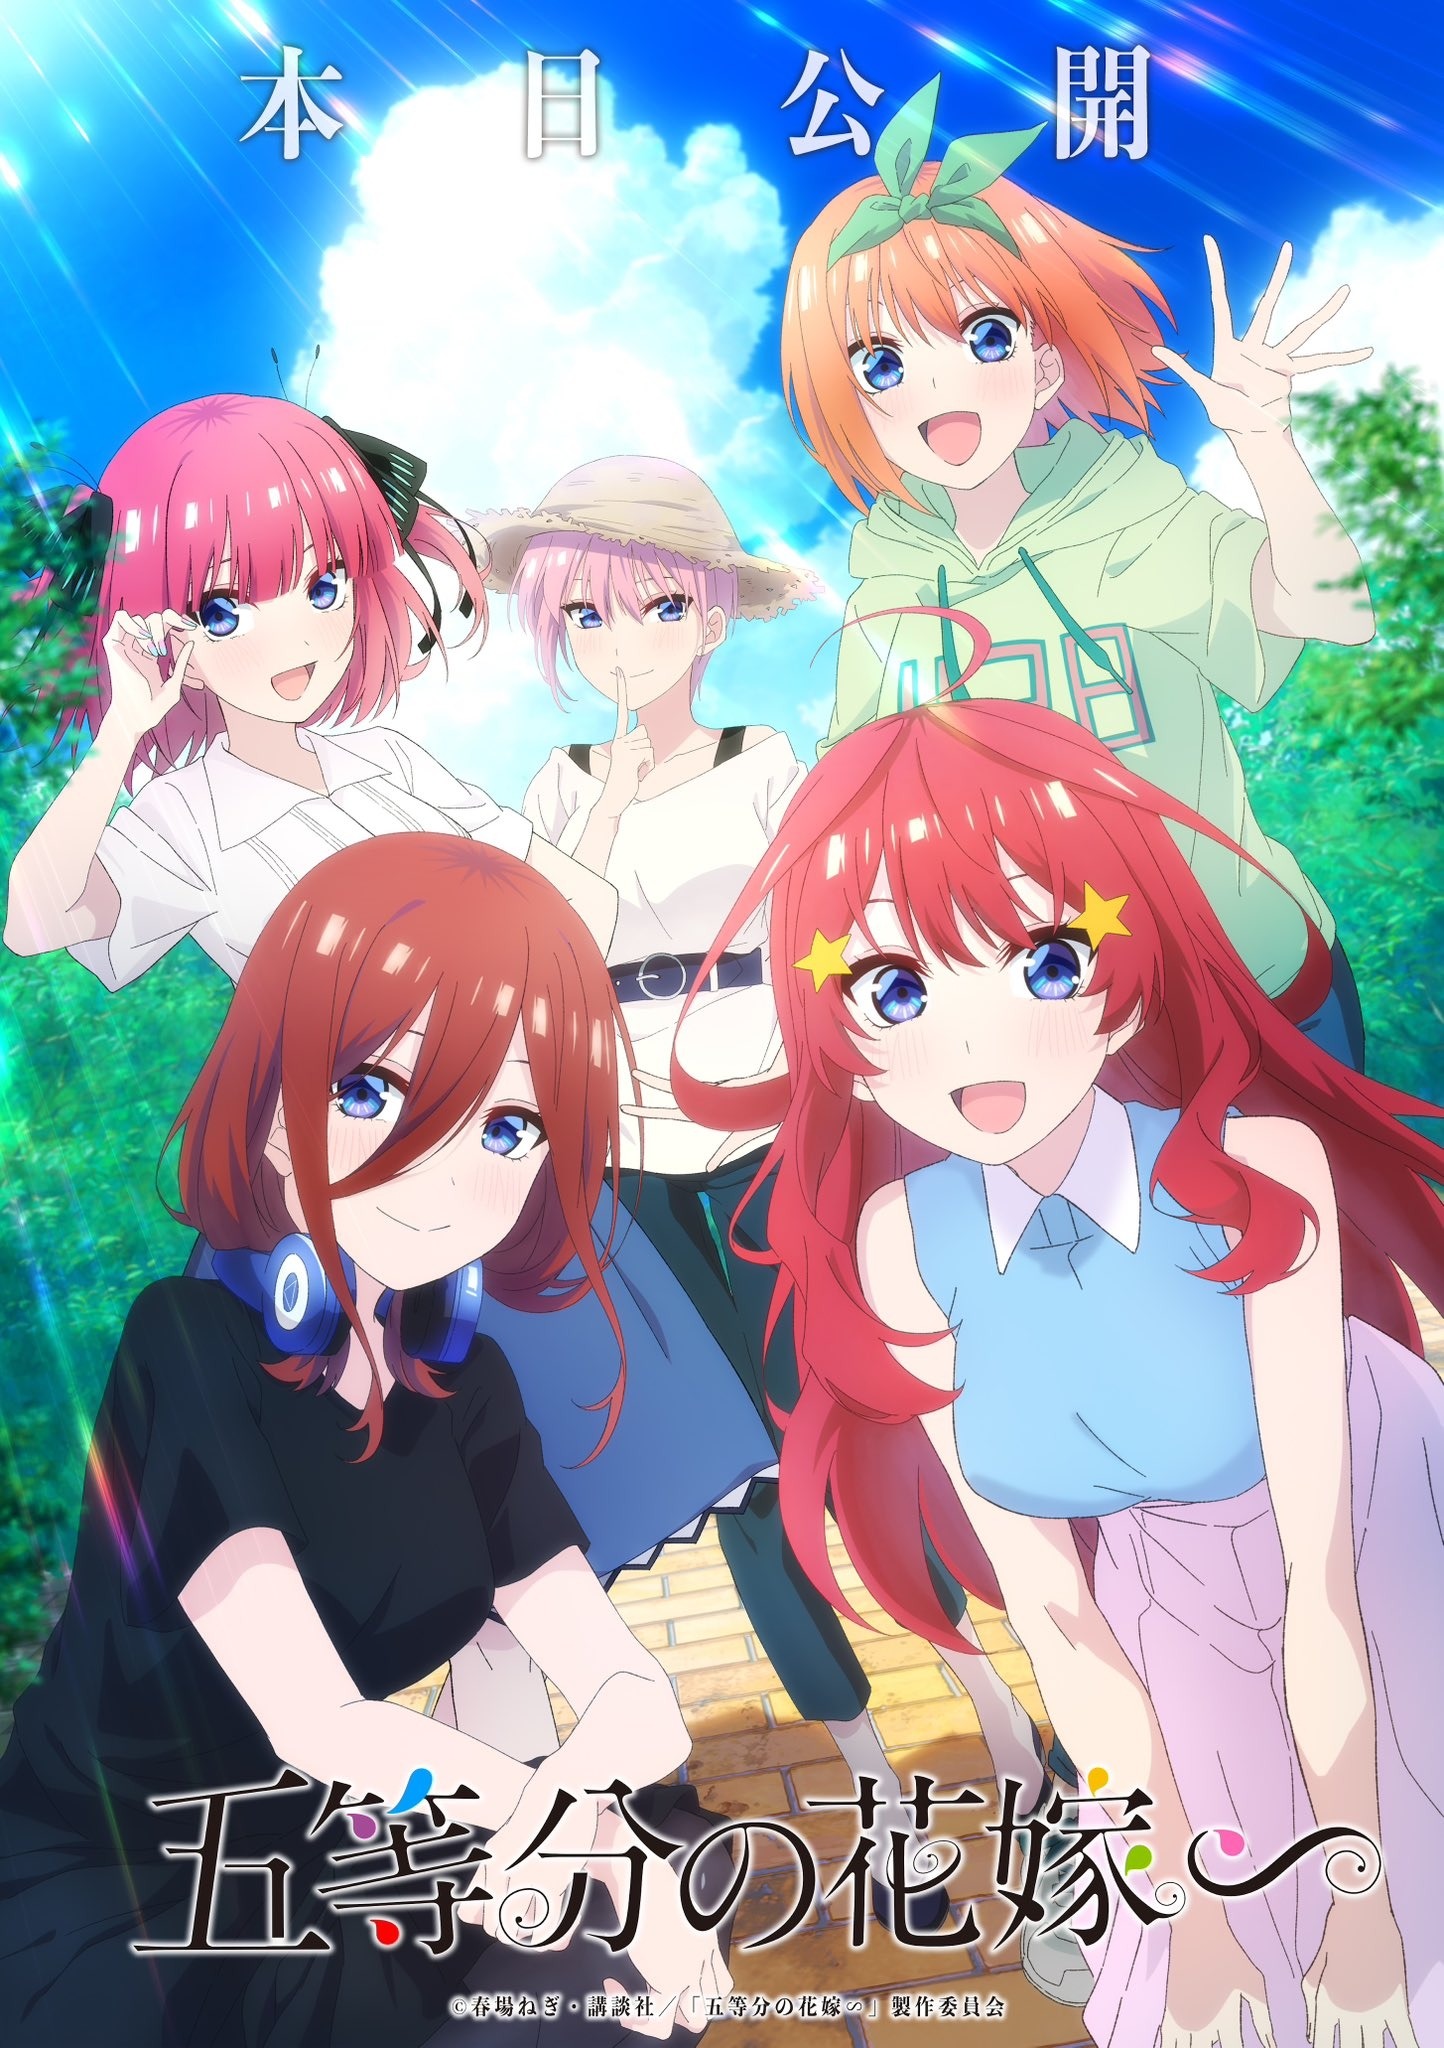 The Quintessential Quintuplets Side Story Anime Hyped in New Illustrations